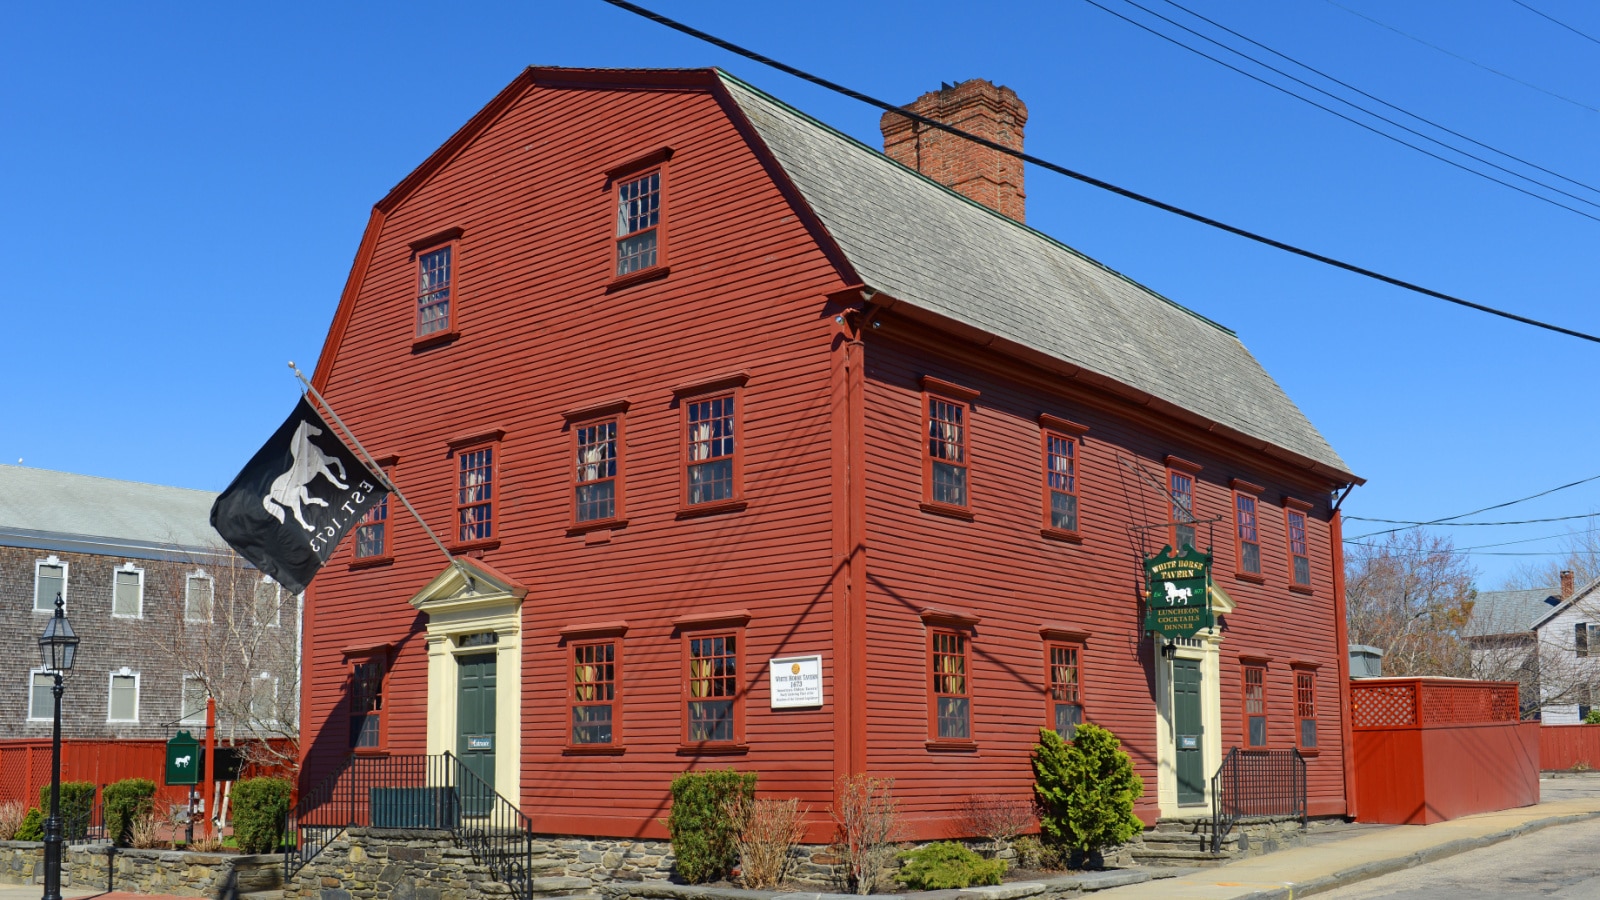 NEWPORT, RI, USA - APR. 19, 2015: White Horse Tavern was built in 1673, is the oldest continuously operating tarvern of the nation in Newport, Rhode Island RI, USA.